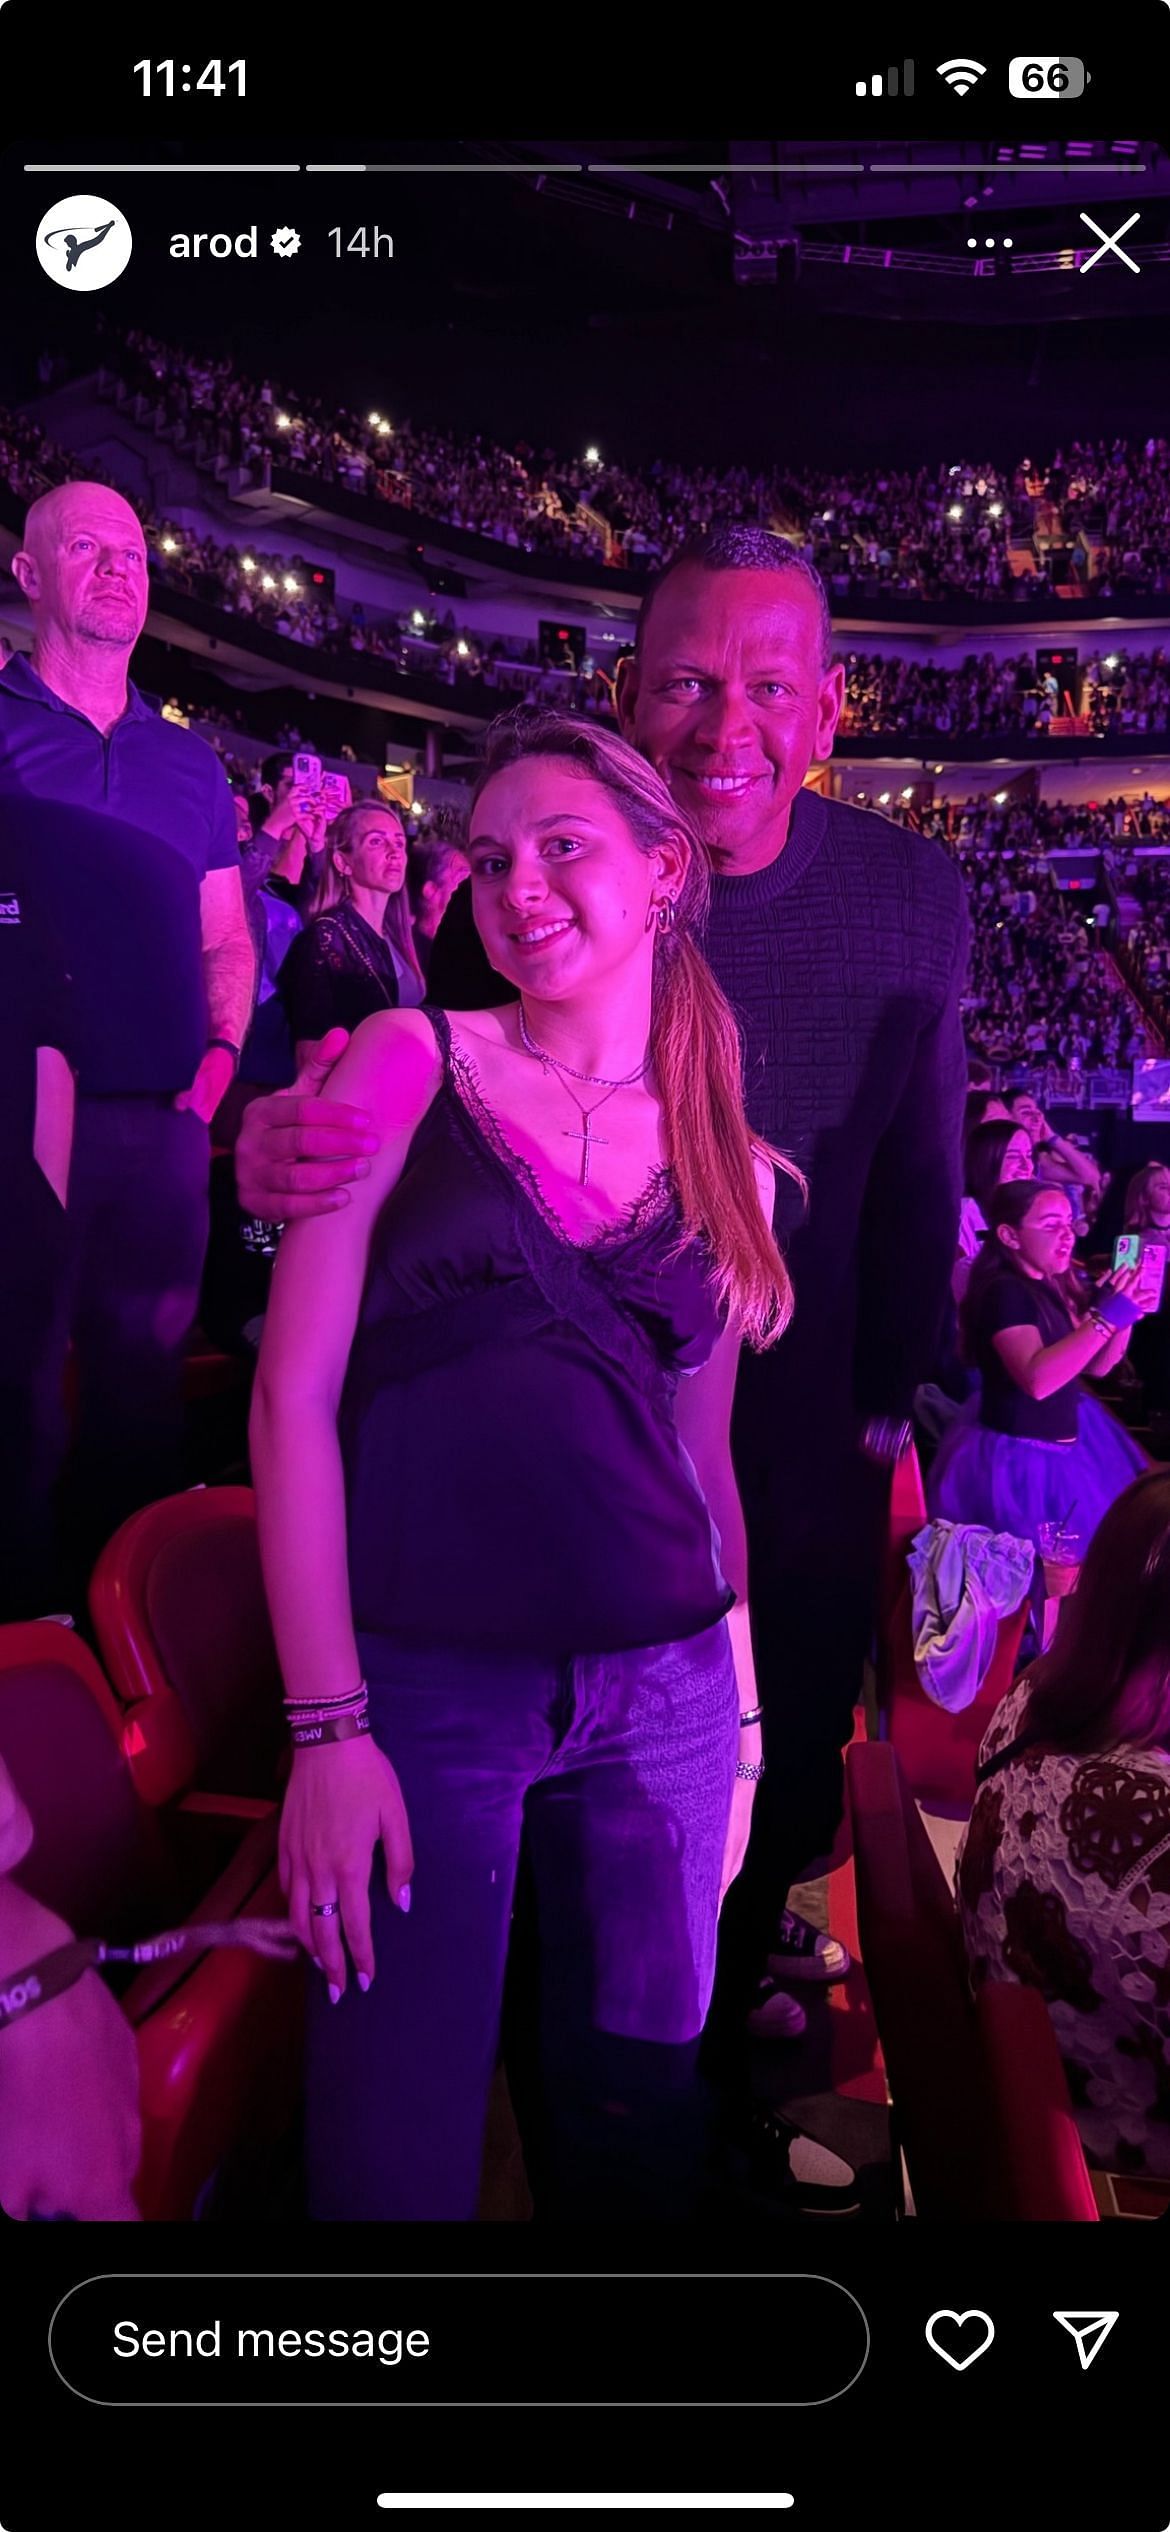 A-Rod with his daughter Ella at the concert.